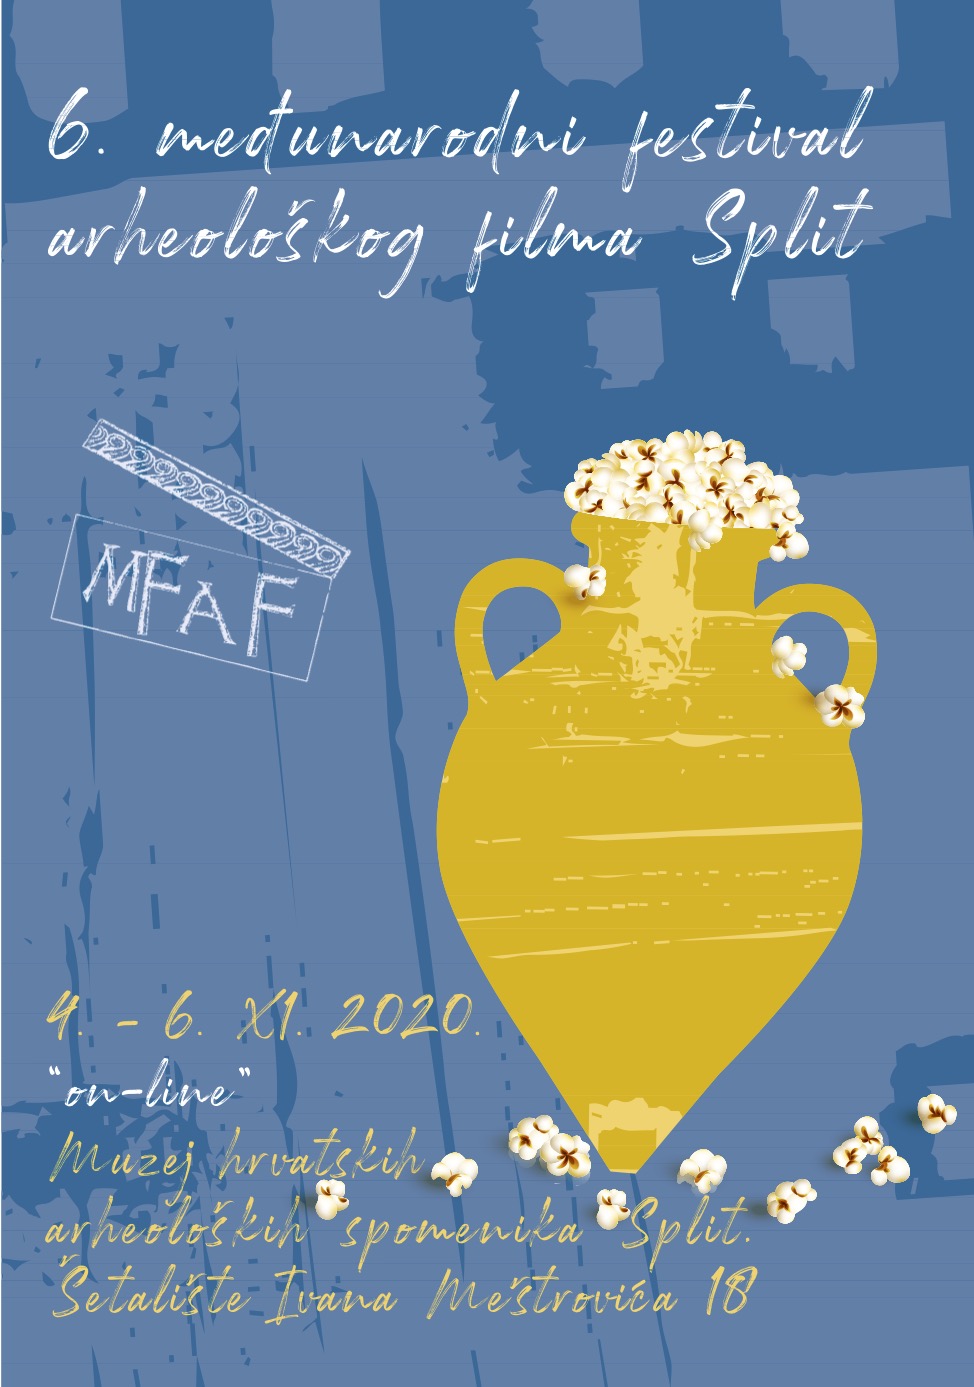 The documentary ‘Time Has Not Helped’ screened at the 6th International Archaeology Film Festival – MFAF in Split, Croatia